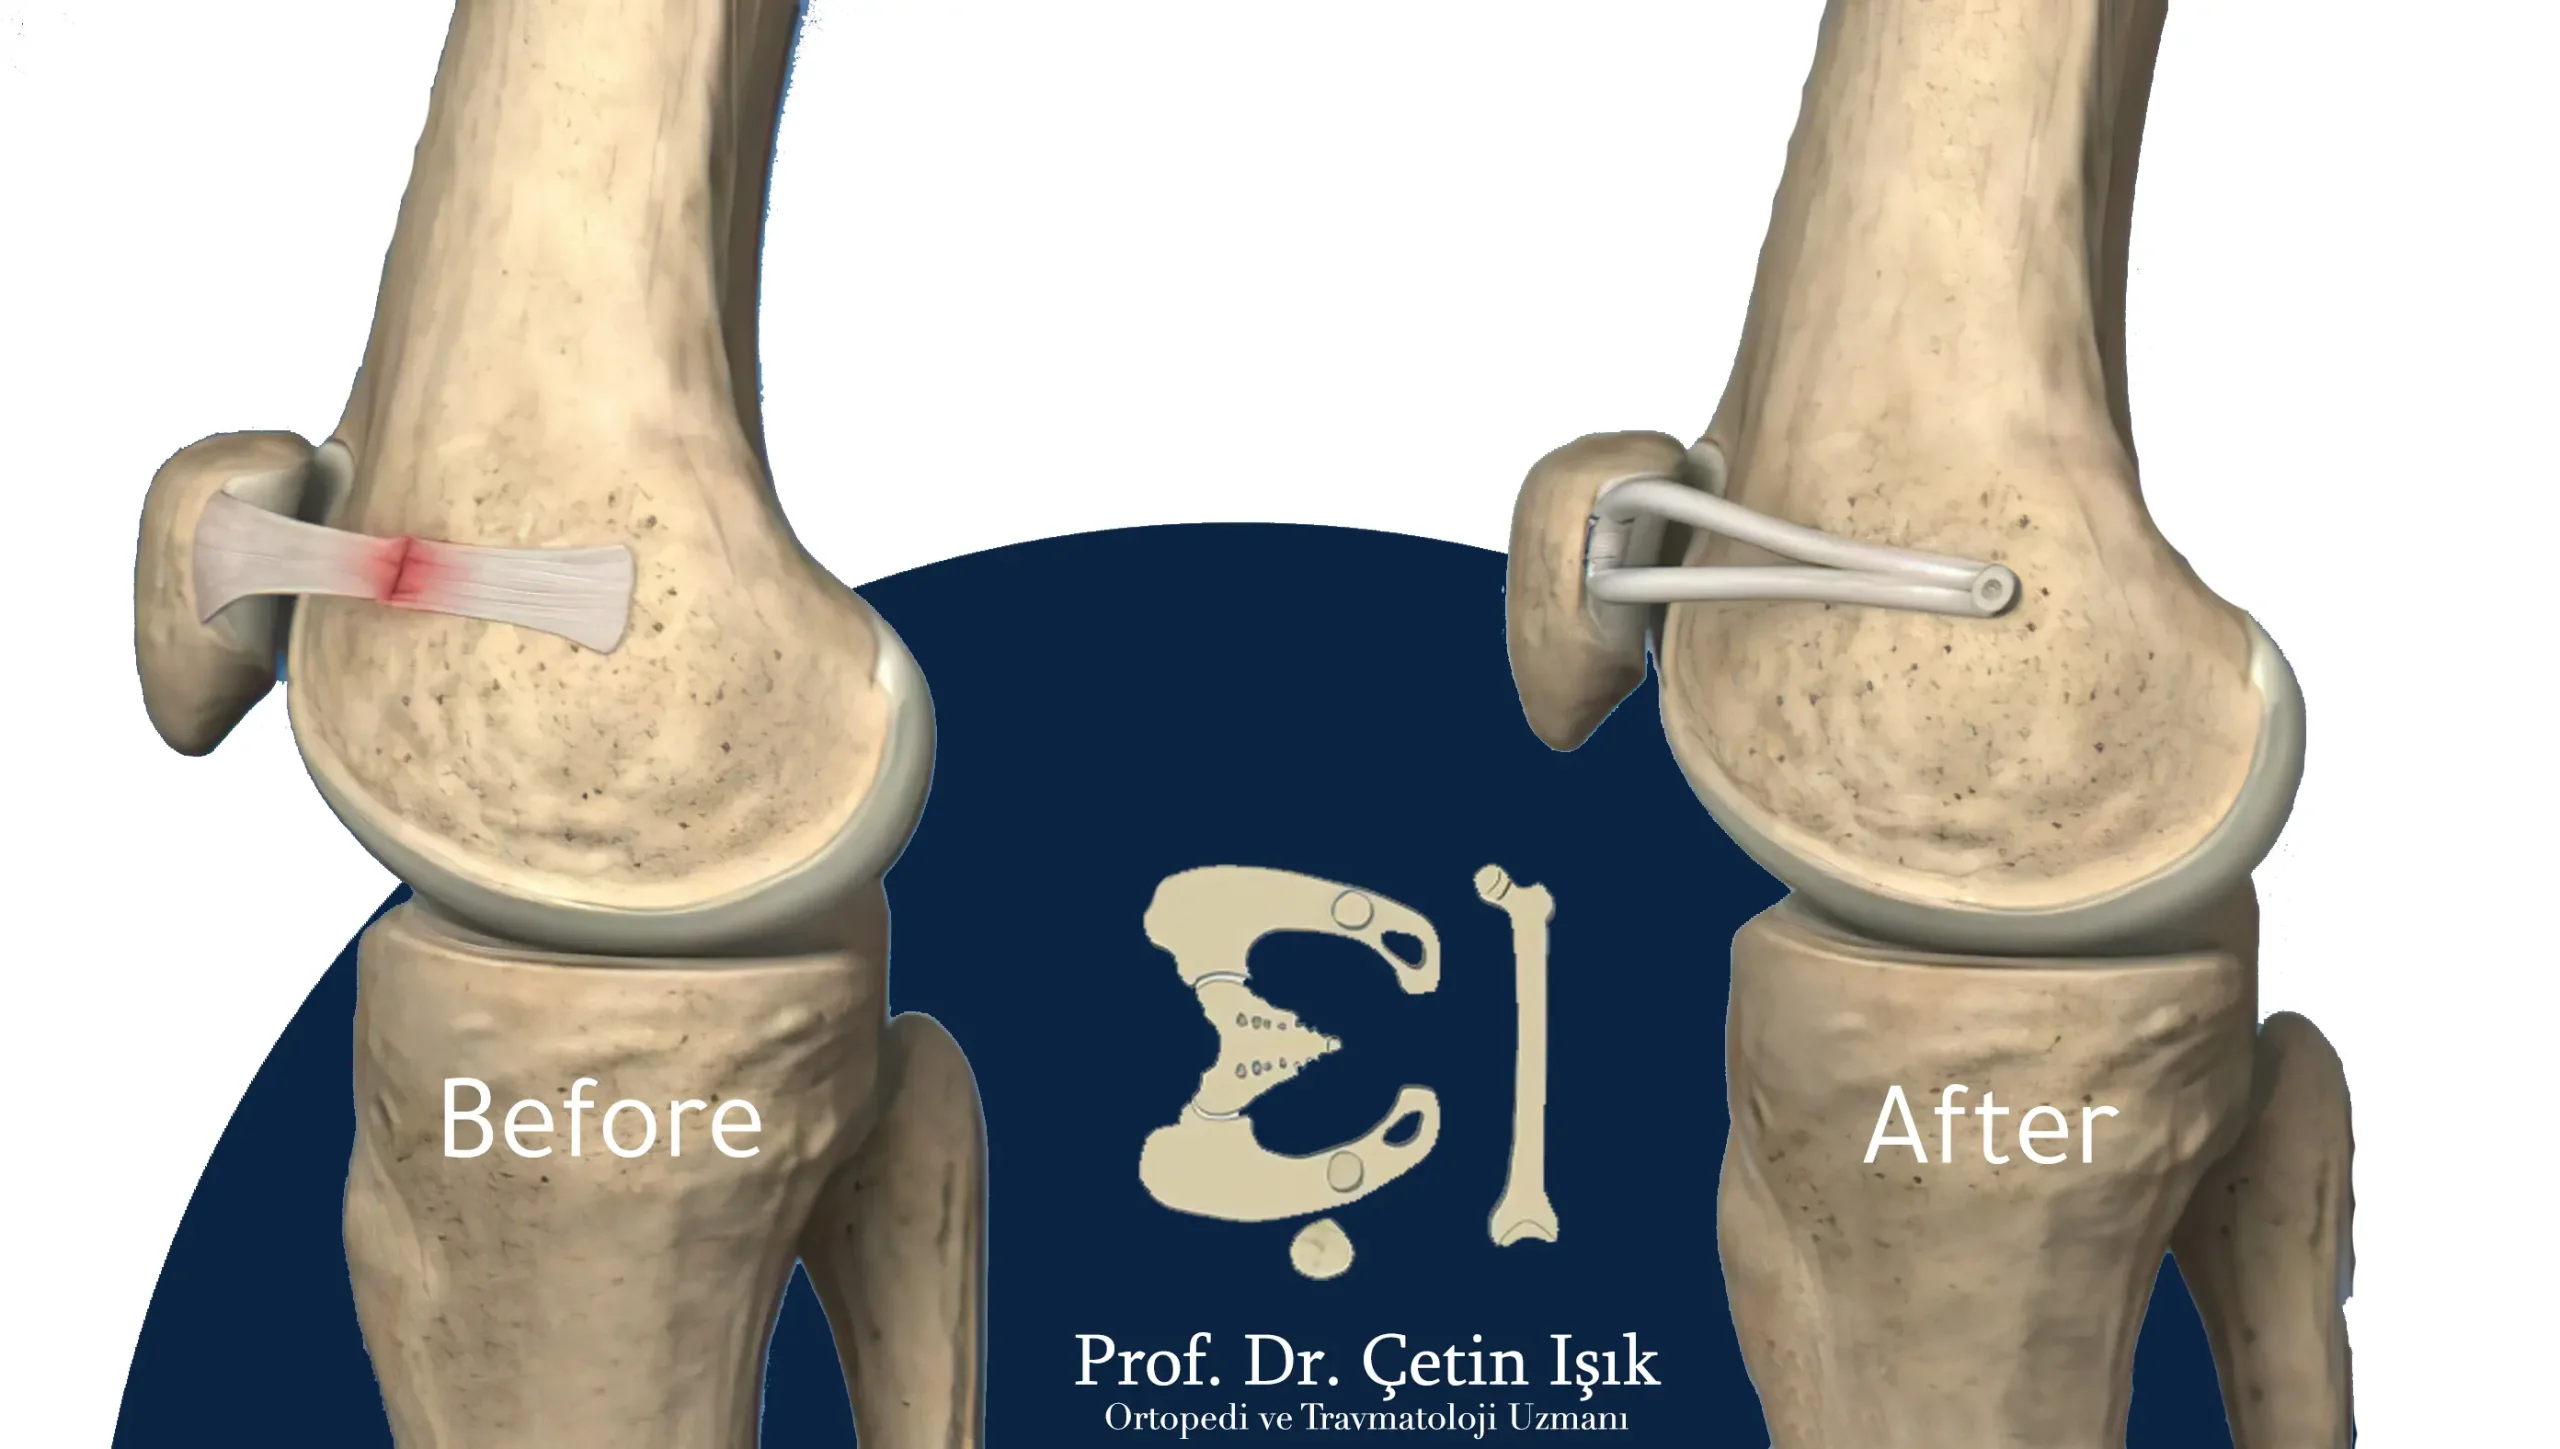 Image showing the implantation of a new medial patellofemoral ligament to replace the old torn ligament that caused the dislocation of the kneecap.